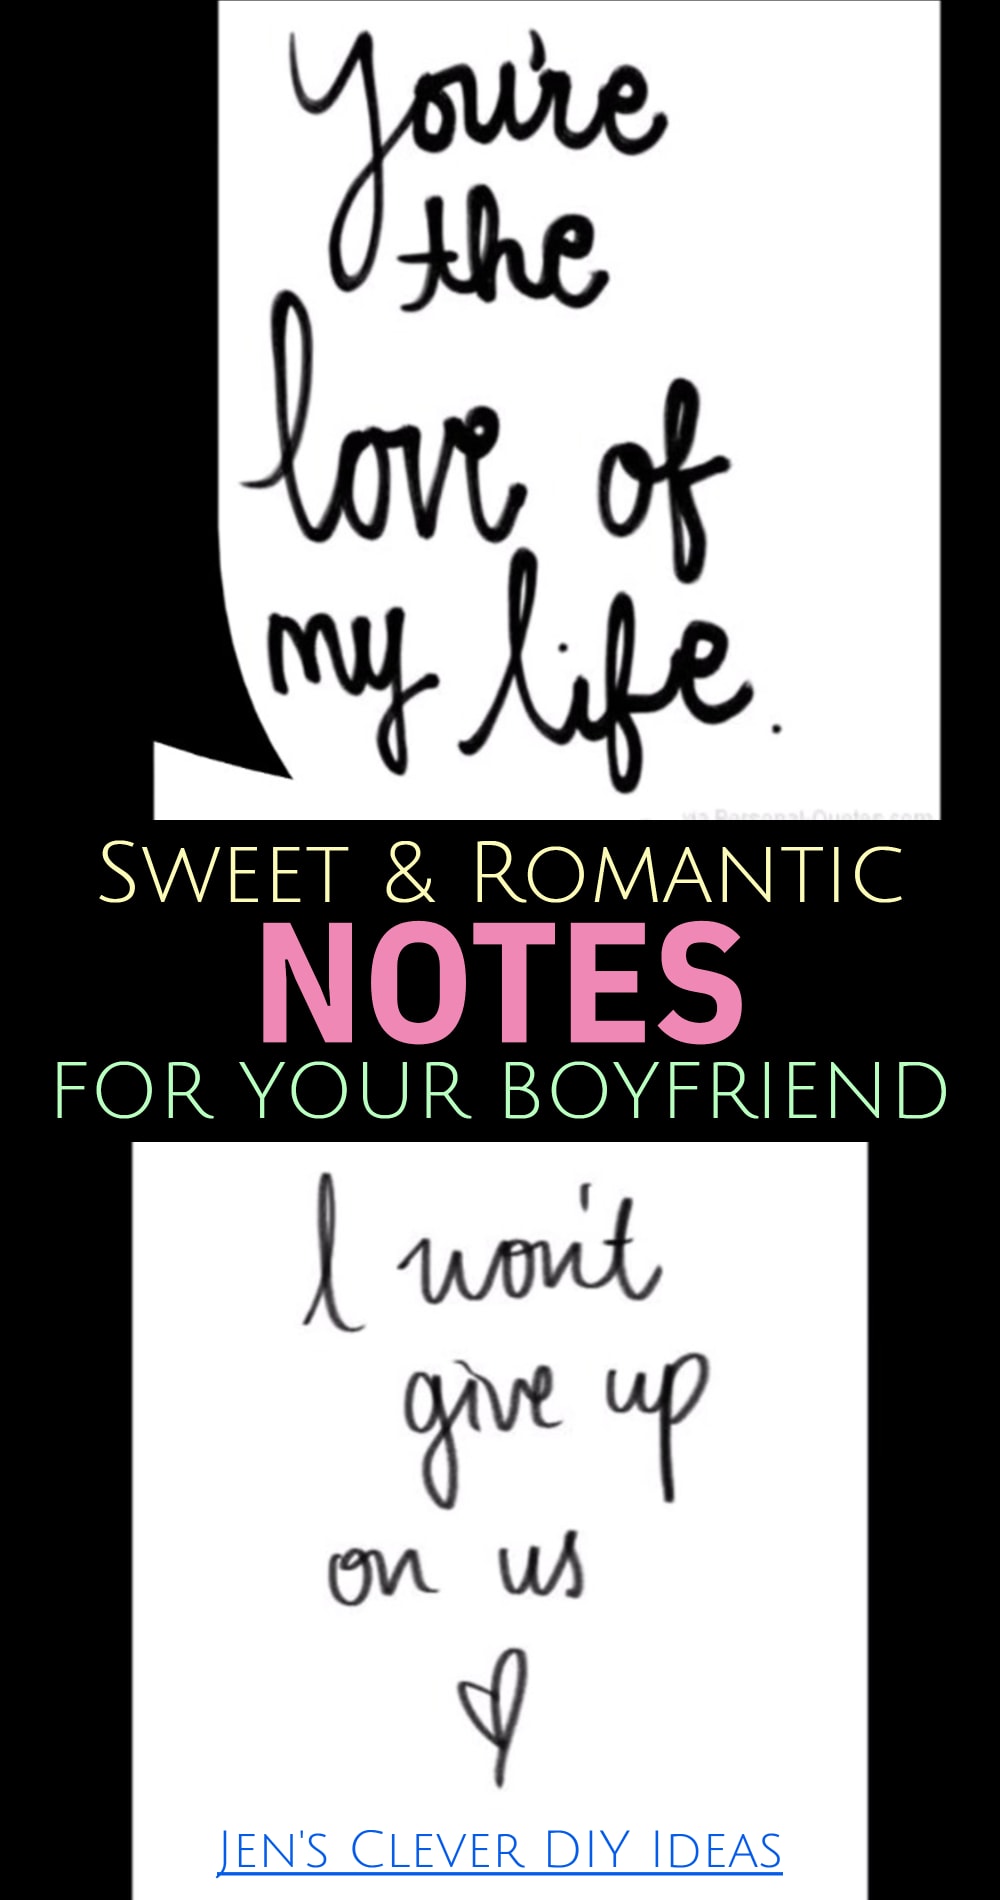 Sweet and romantic notes for your boyfriend, what to write and unique handmade cards to make and give him for Valentine's Day, his birthday, your anniversary and even ideas for long distance relationship love notes